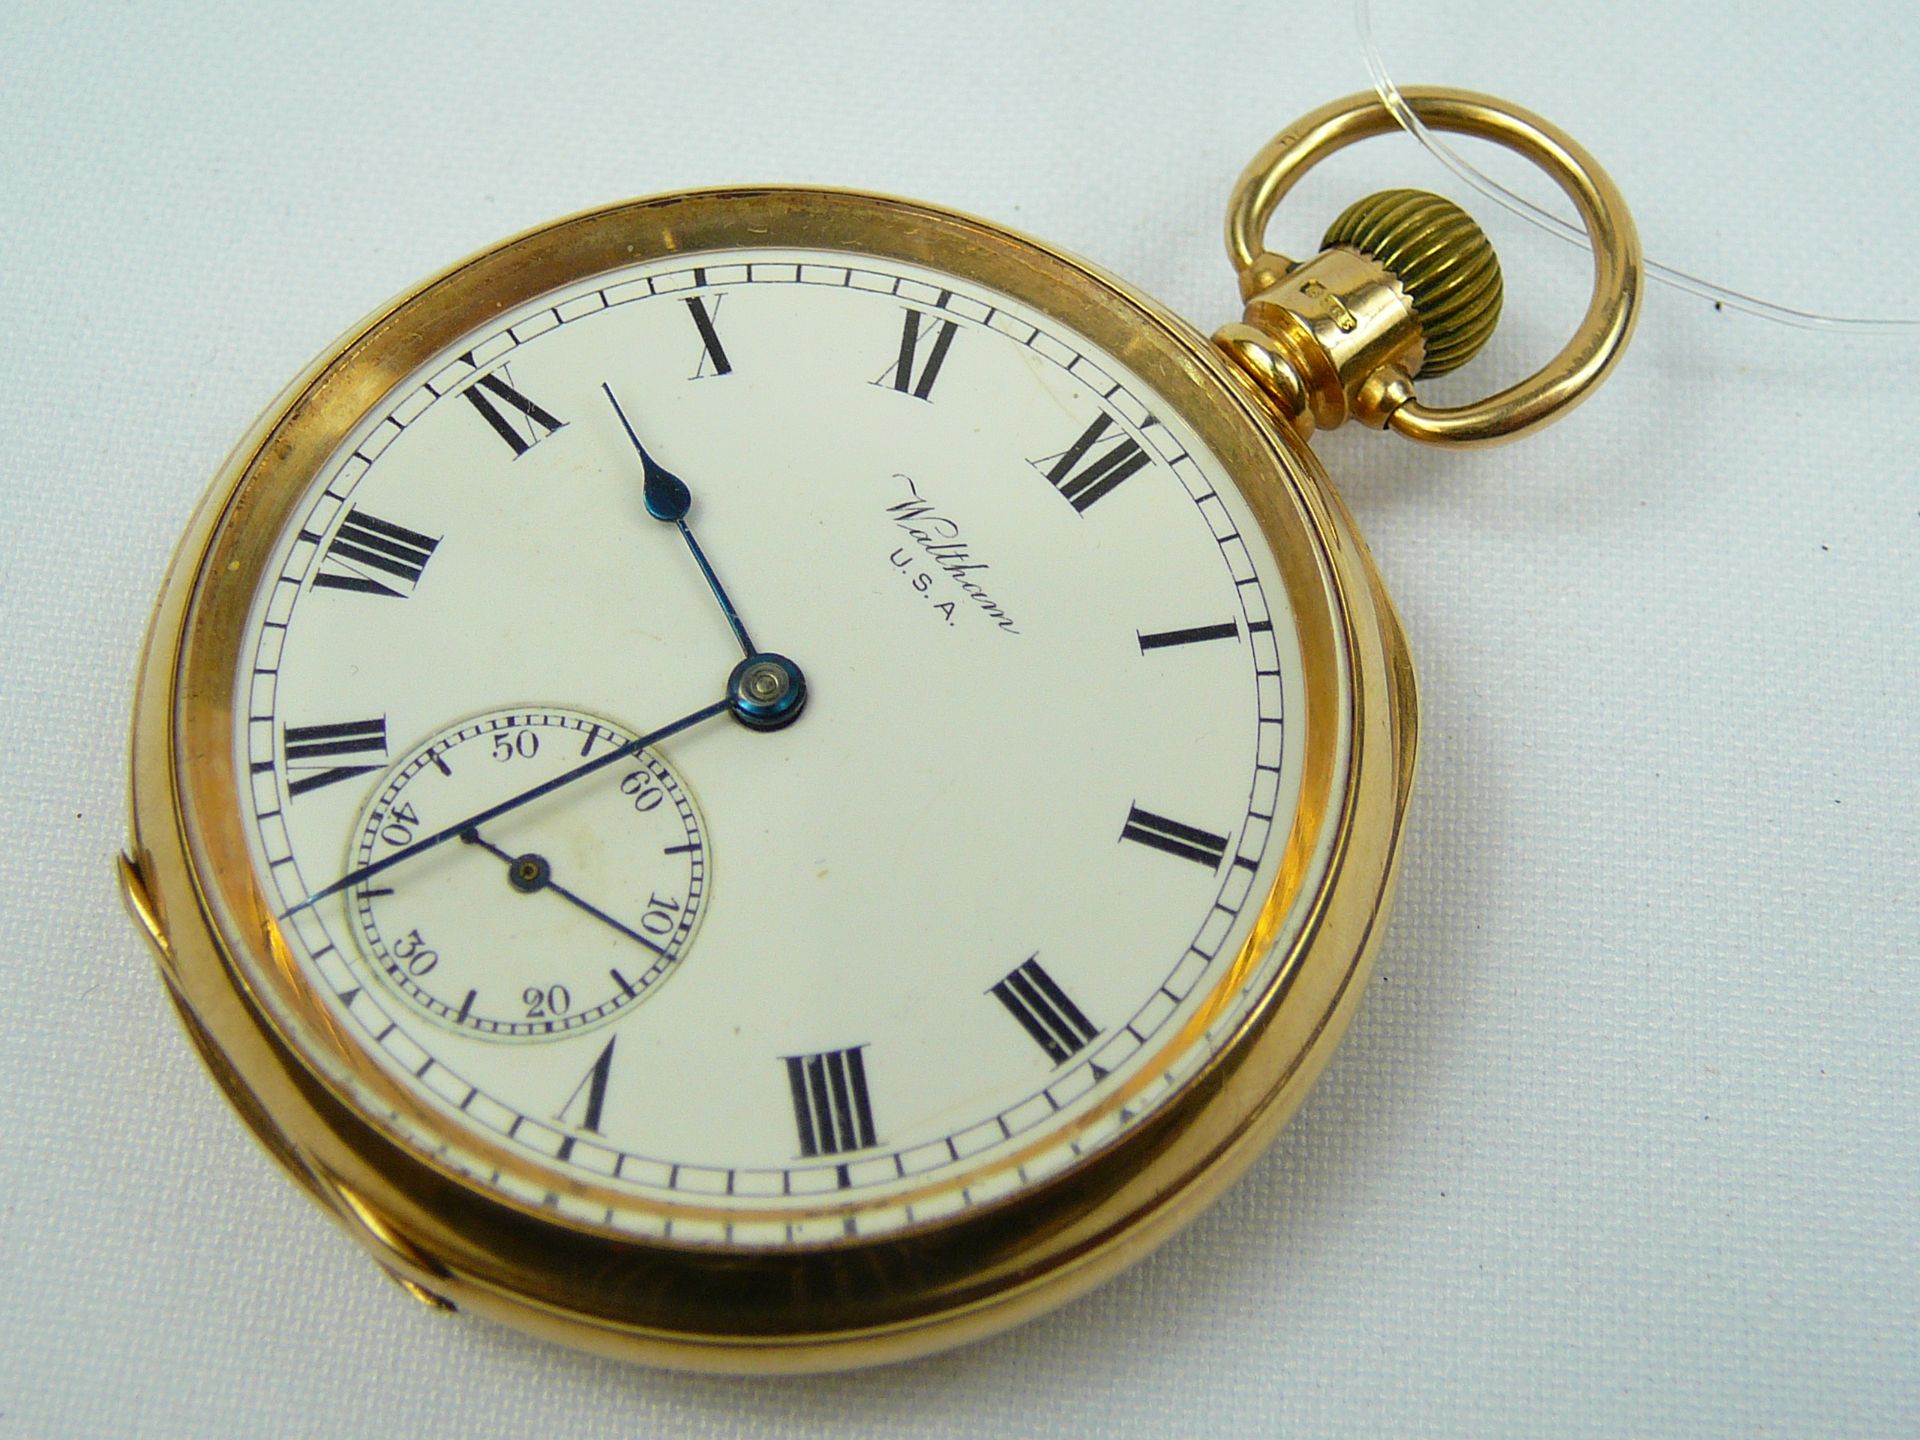 Gents gold pocket watch - Image 3 of 7